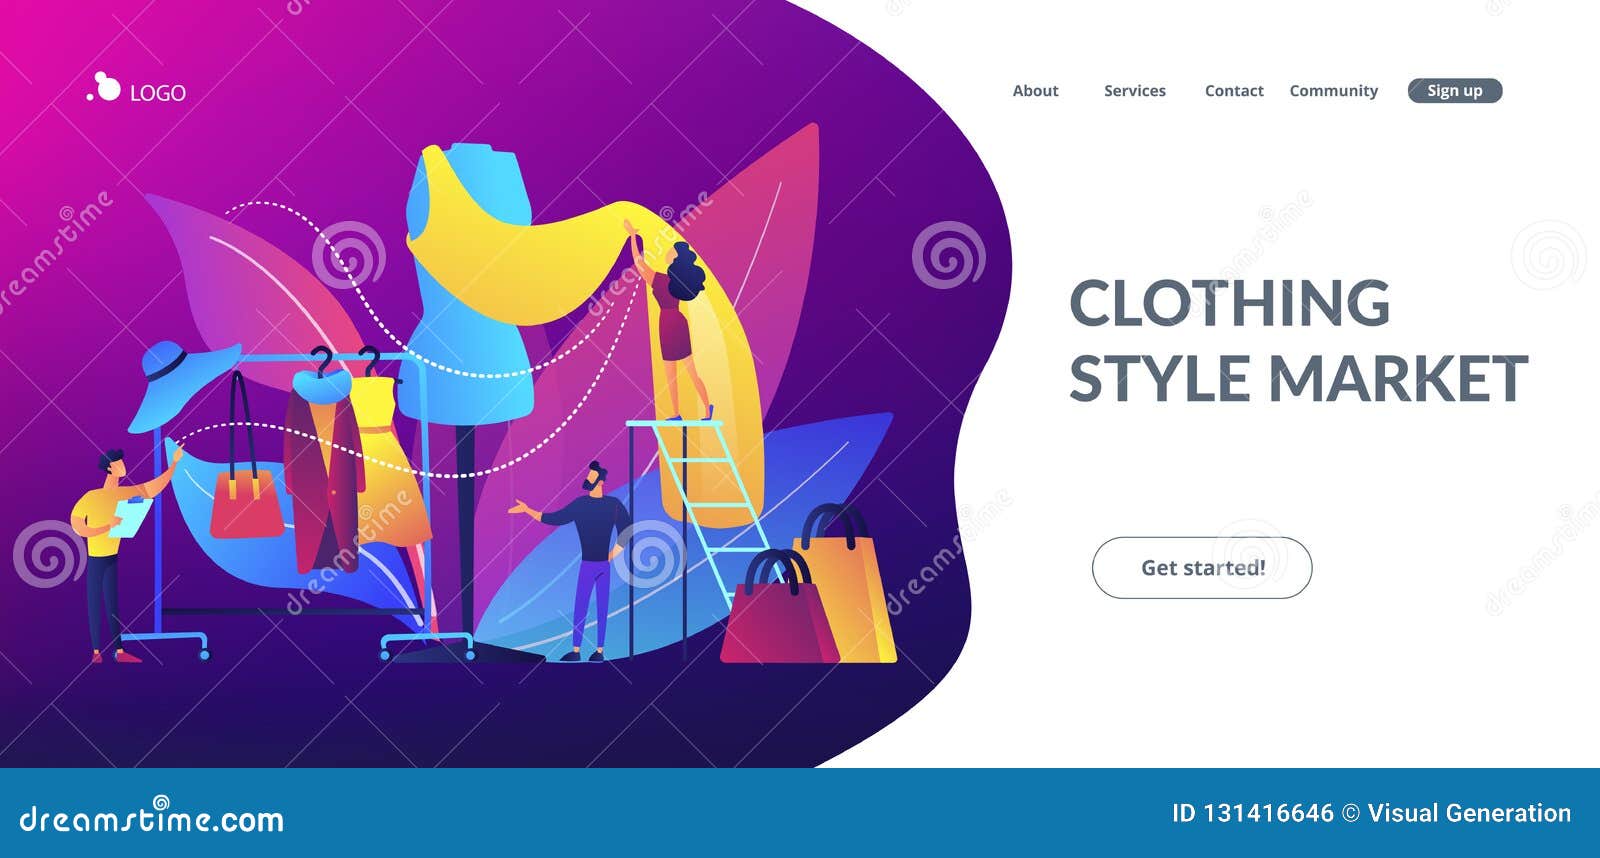 Fashion Industry Concept Landing Page. Stock Vector - Illustration of ...